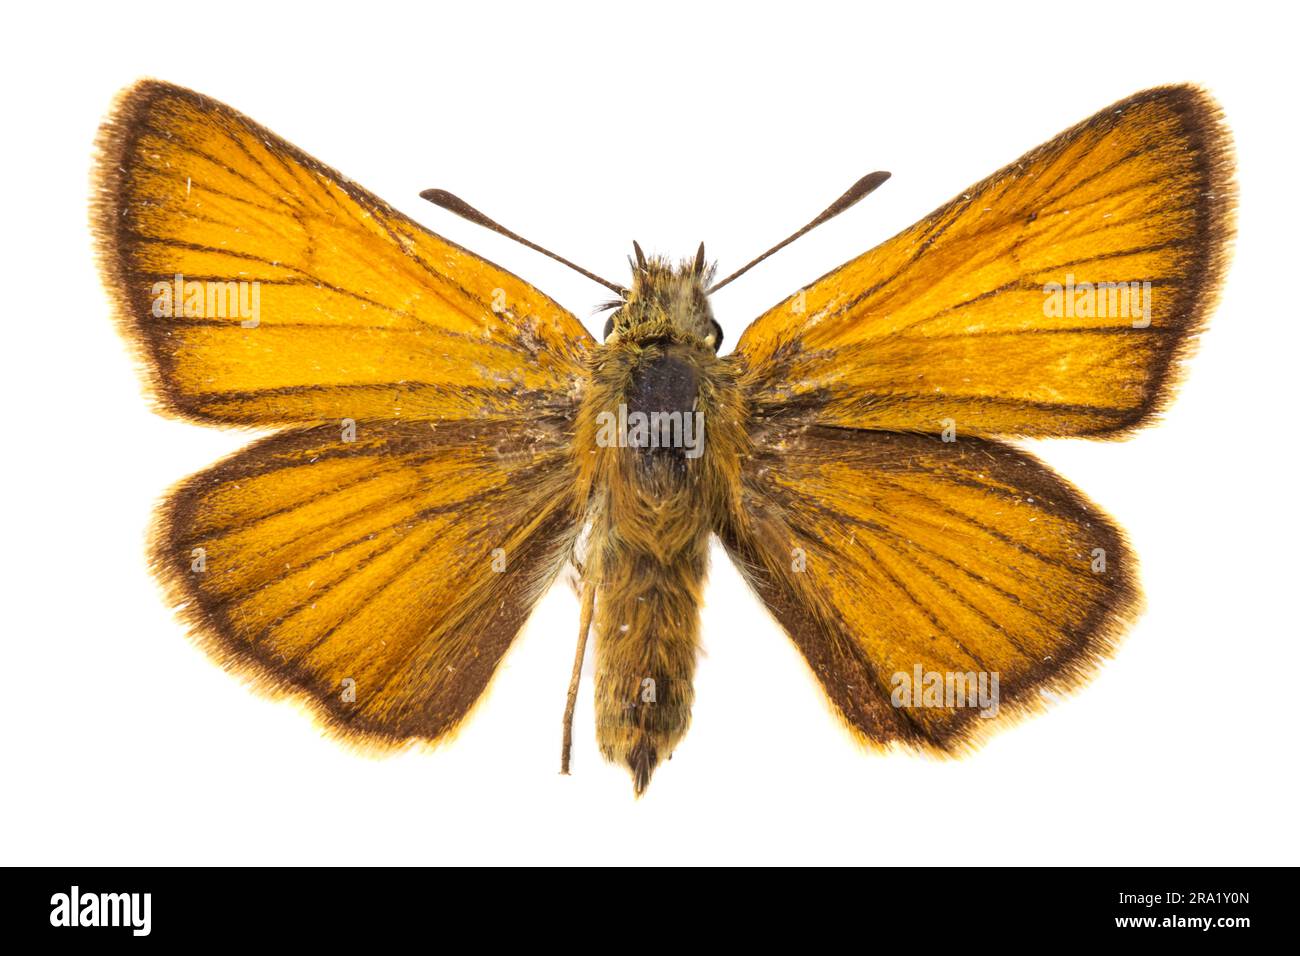 Essex skipper (Thymelicus lineolus, Thymelicus lineola), upperside, cut out, Netherlands Stock Photo